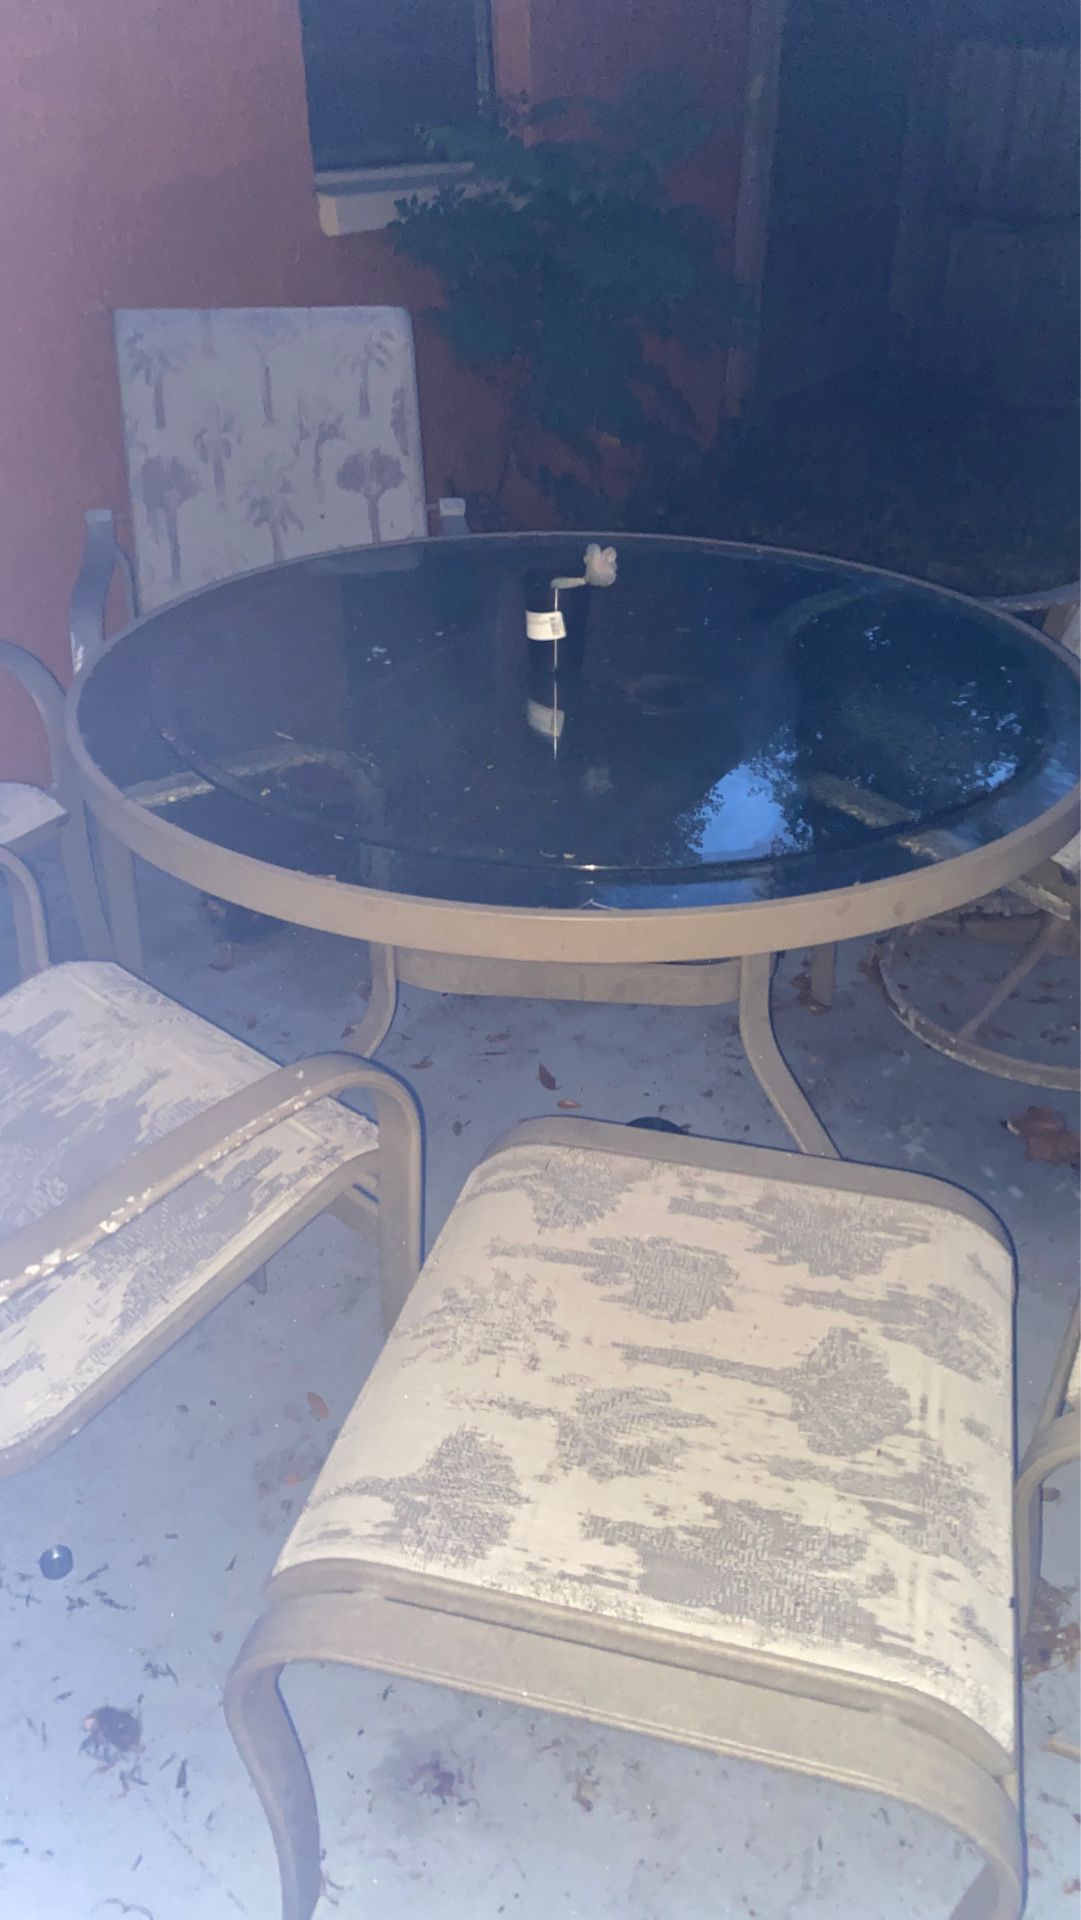 Patio set 7 chairs and 2 ottoman type seats with glass table